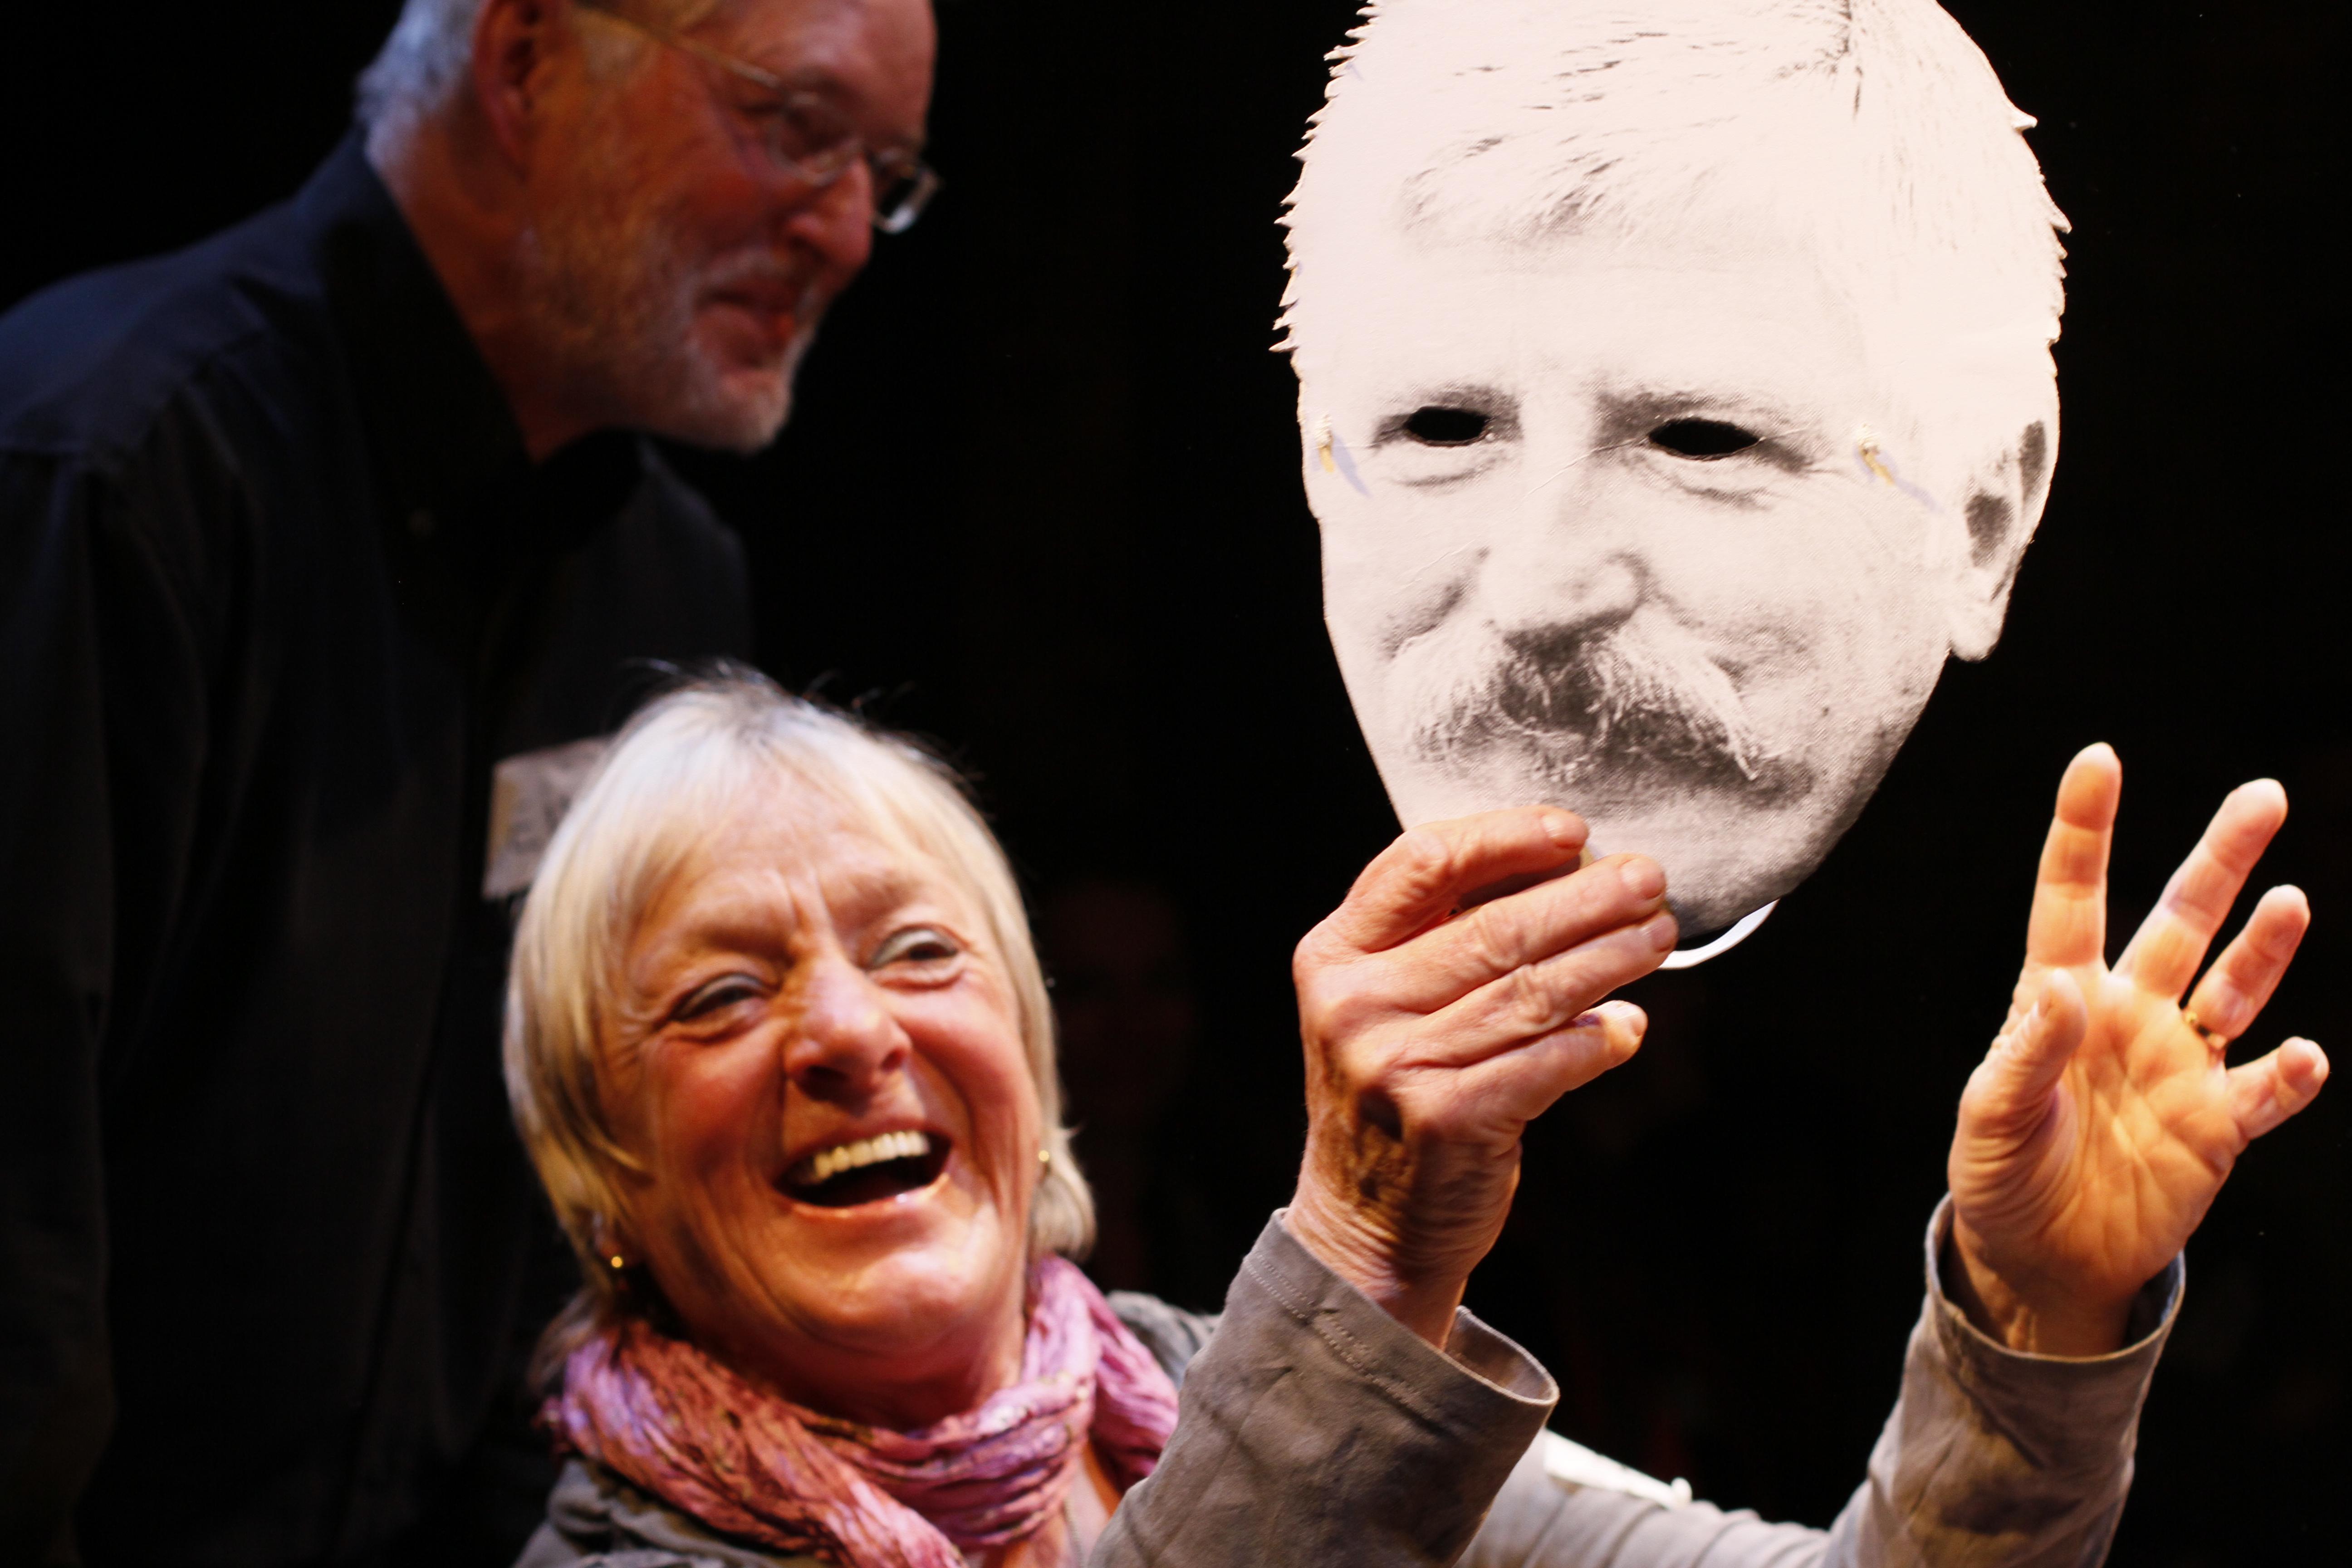 A woman holds a cardboard mask printed with the face of a mustached man